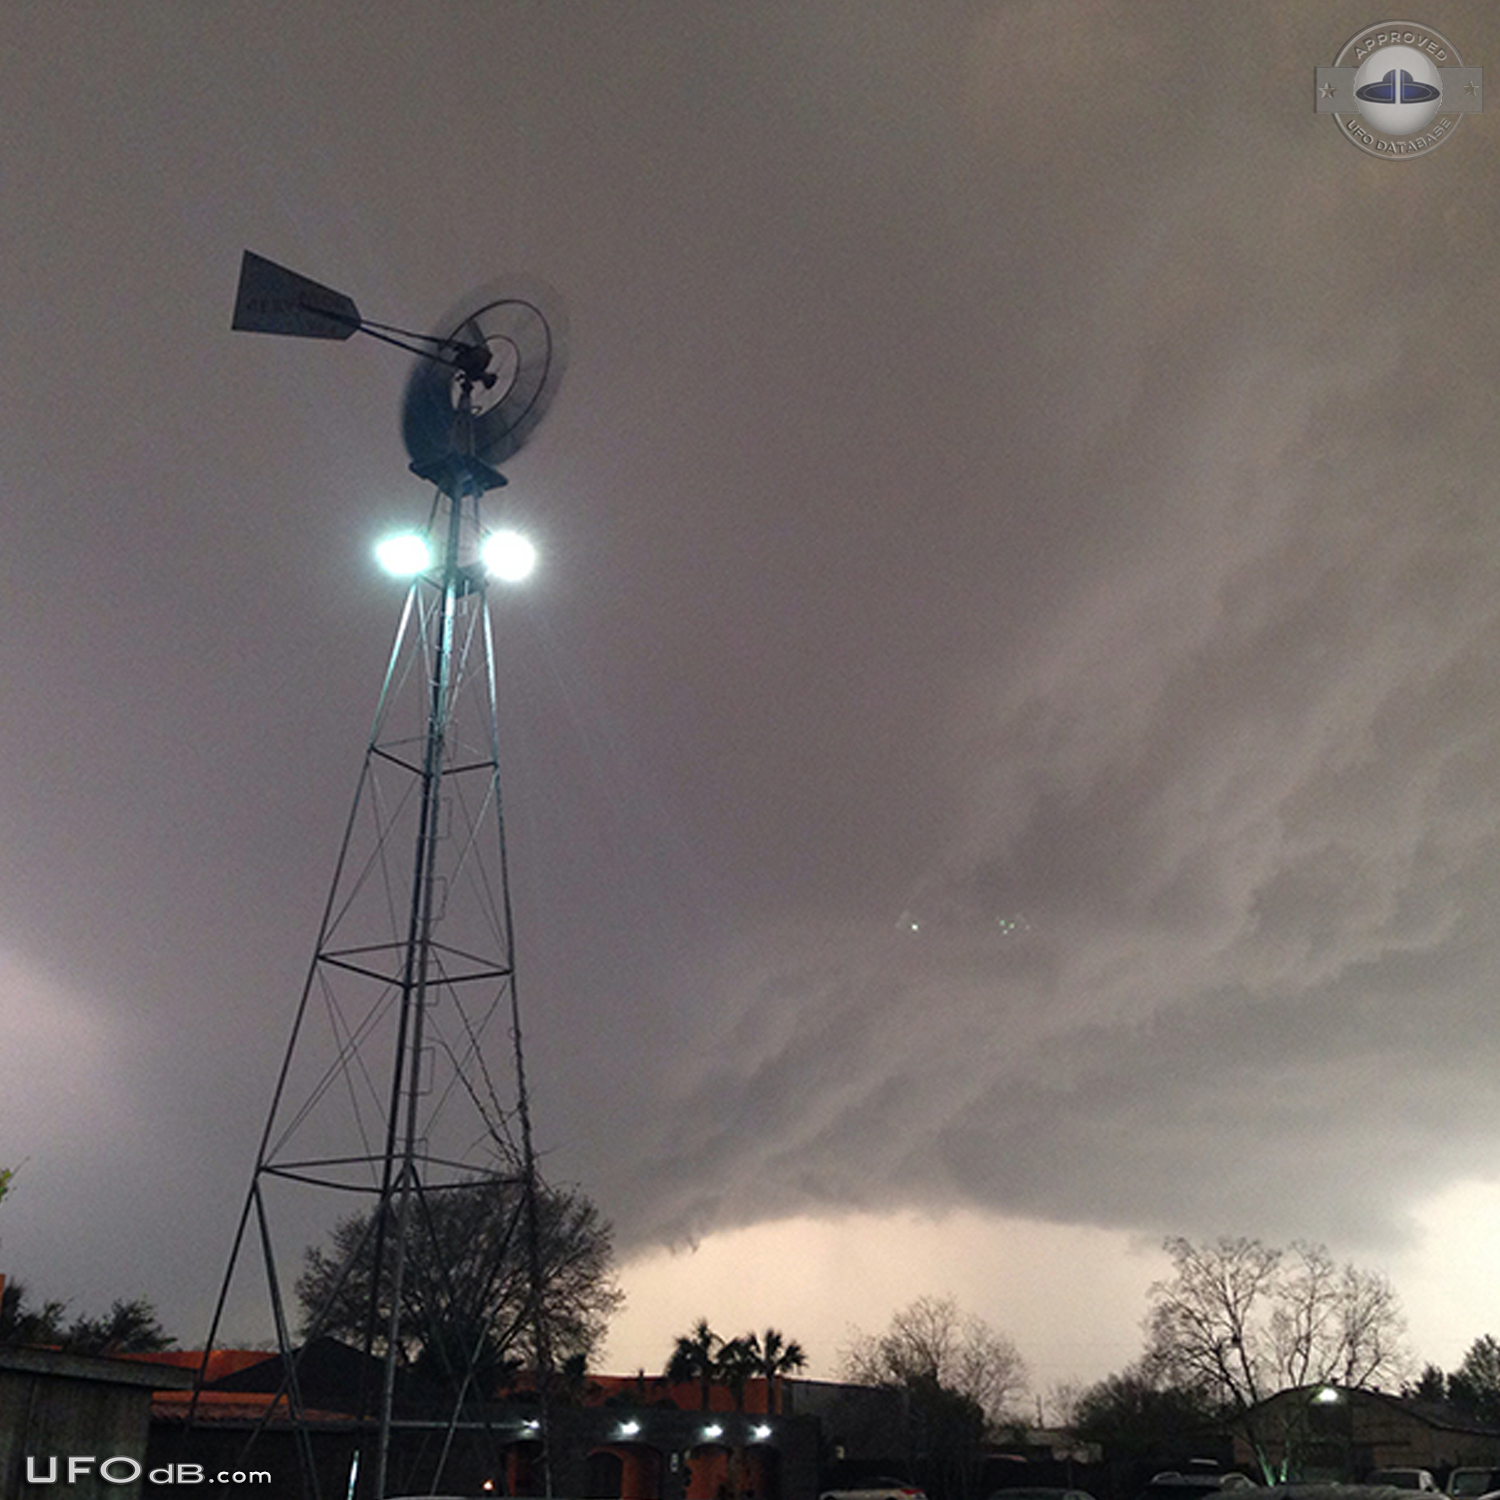 Diamond UFO hiding in the storm caught on picture over Katy Texas 2014 UFO Picture #573-5